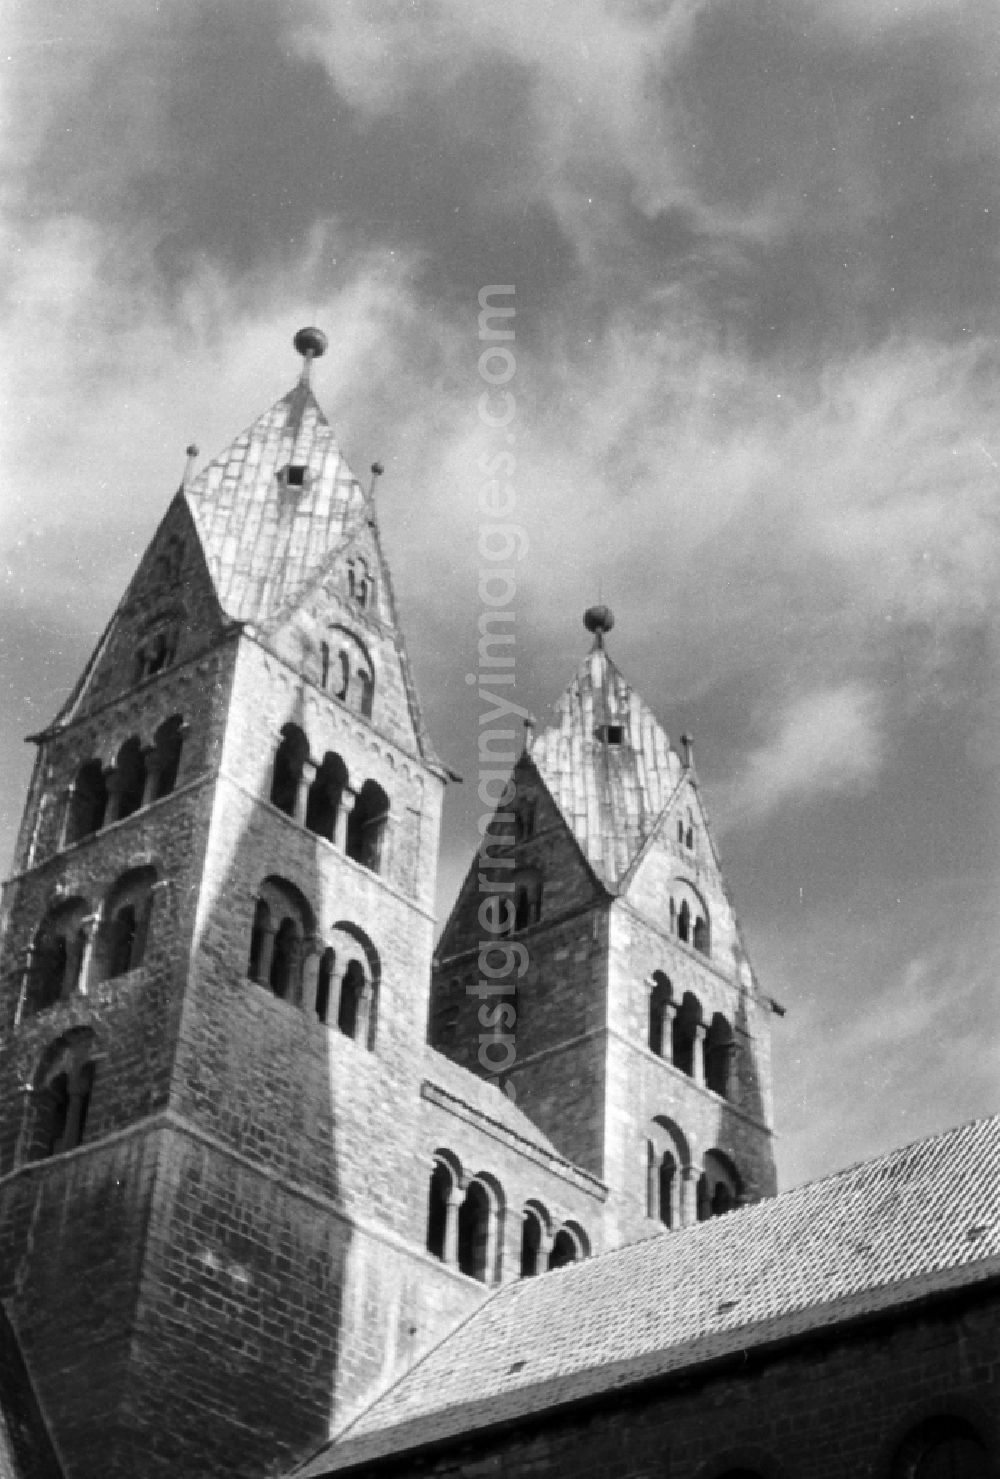 Halberstadt: Facade and roof of the sacral building of the church West Towers of the Church of Our Lady in Halberstadt in the state Saxony-Anhalt on the territory of the former GDR, German Democratic Republic